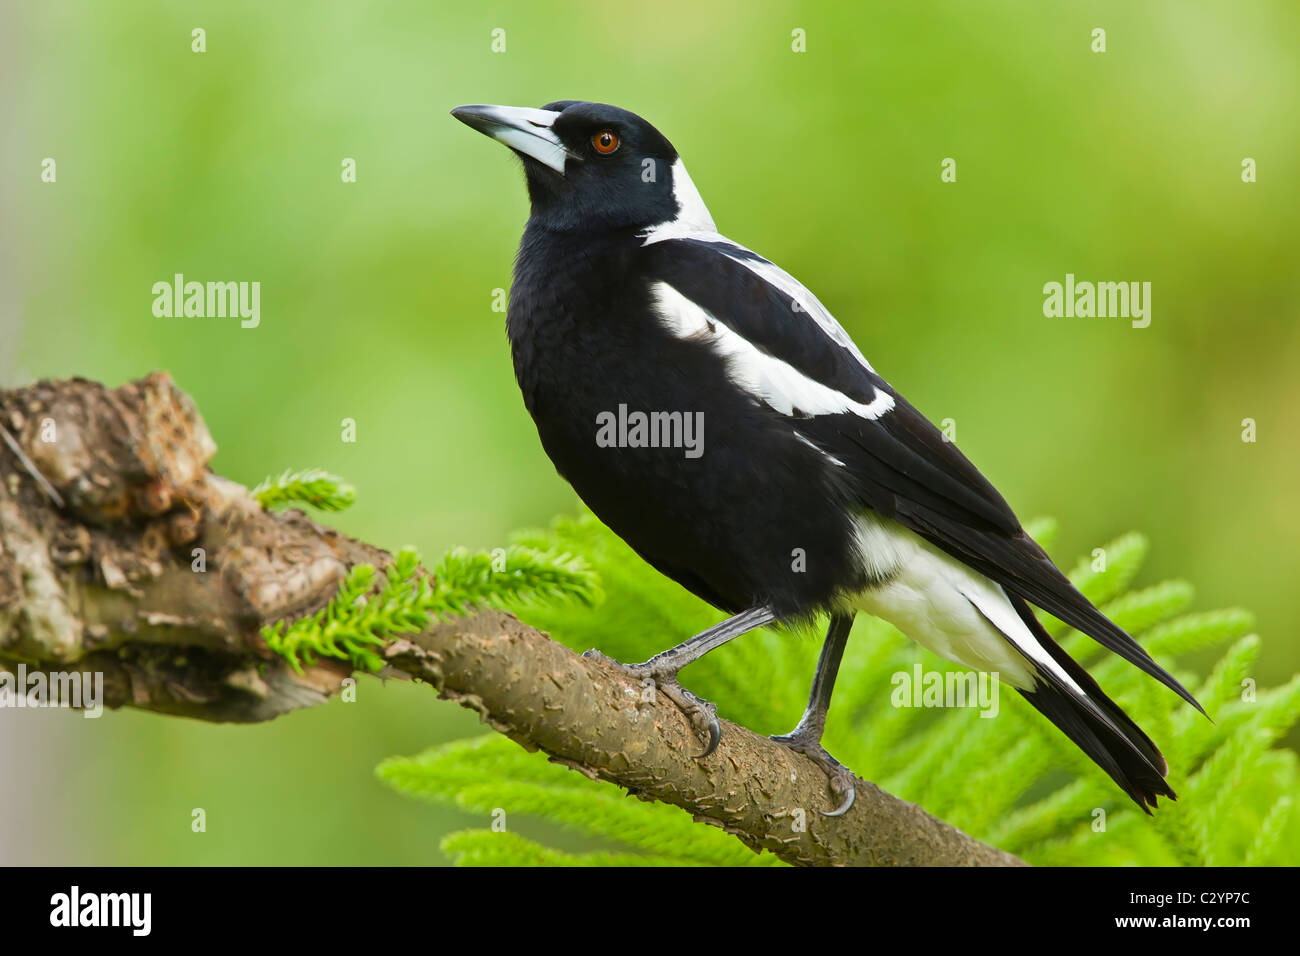 Australian Magpie perched in a tree. Stock Photo